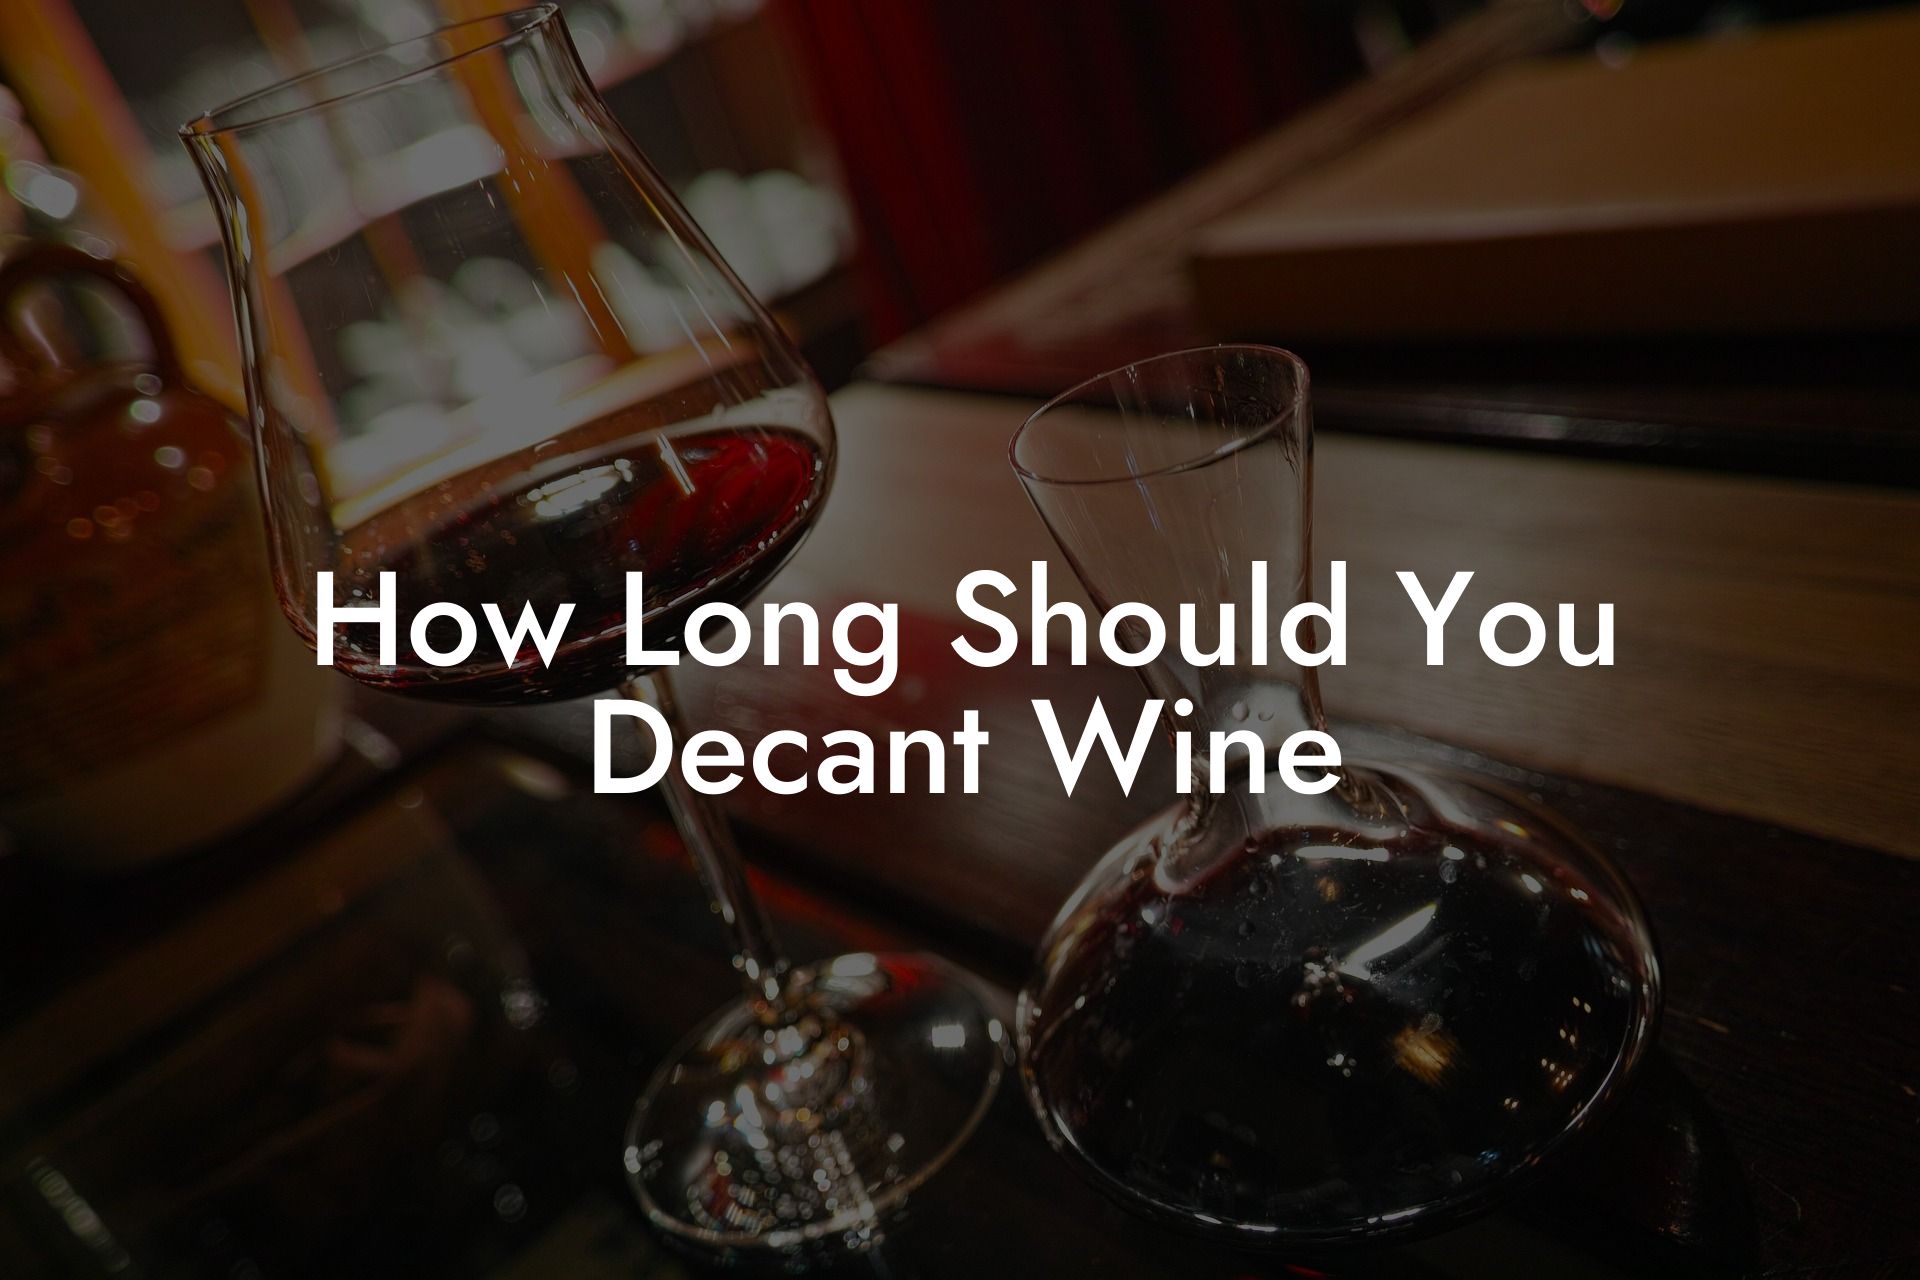 How Long Should You Decant Wine